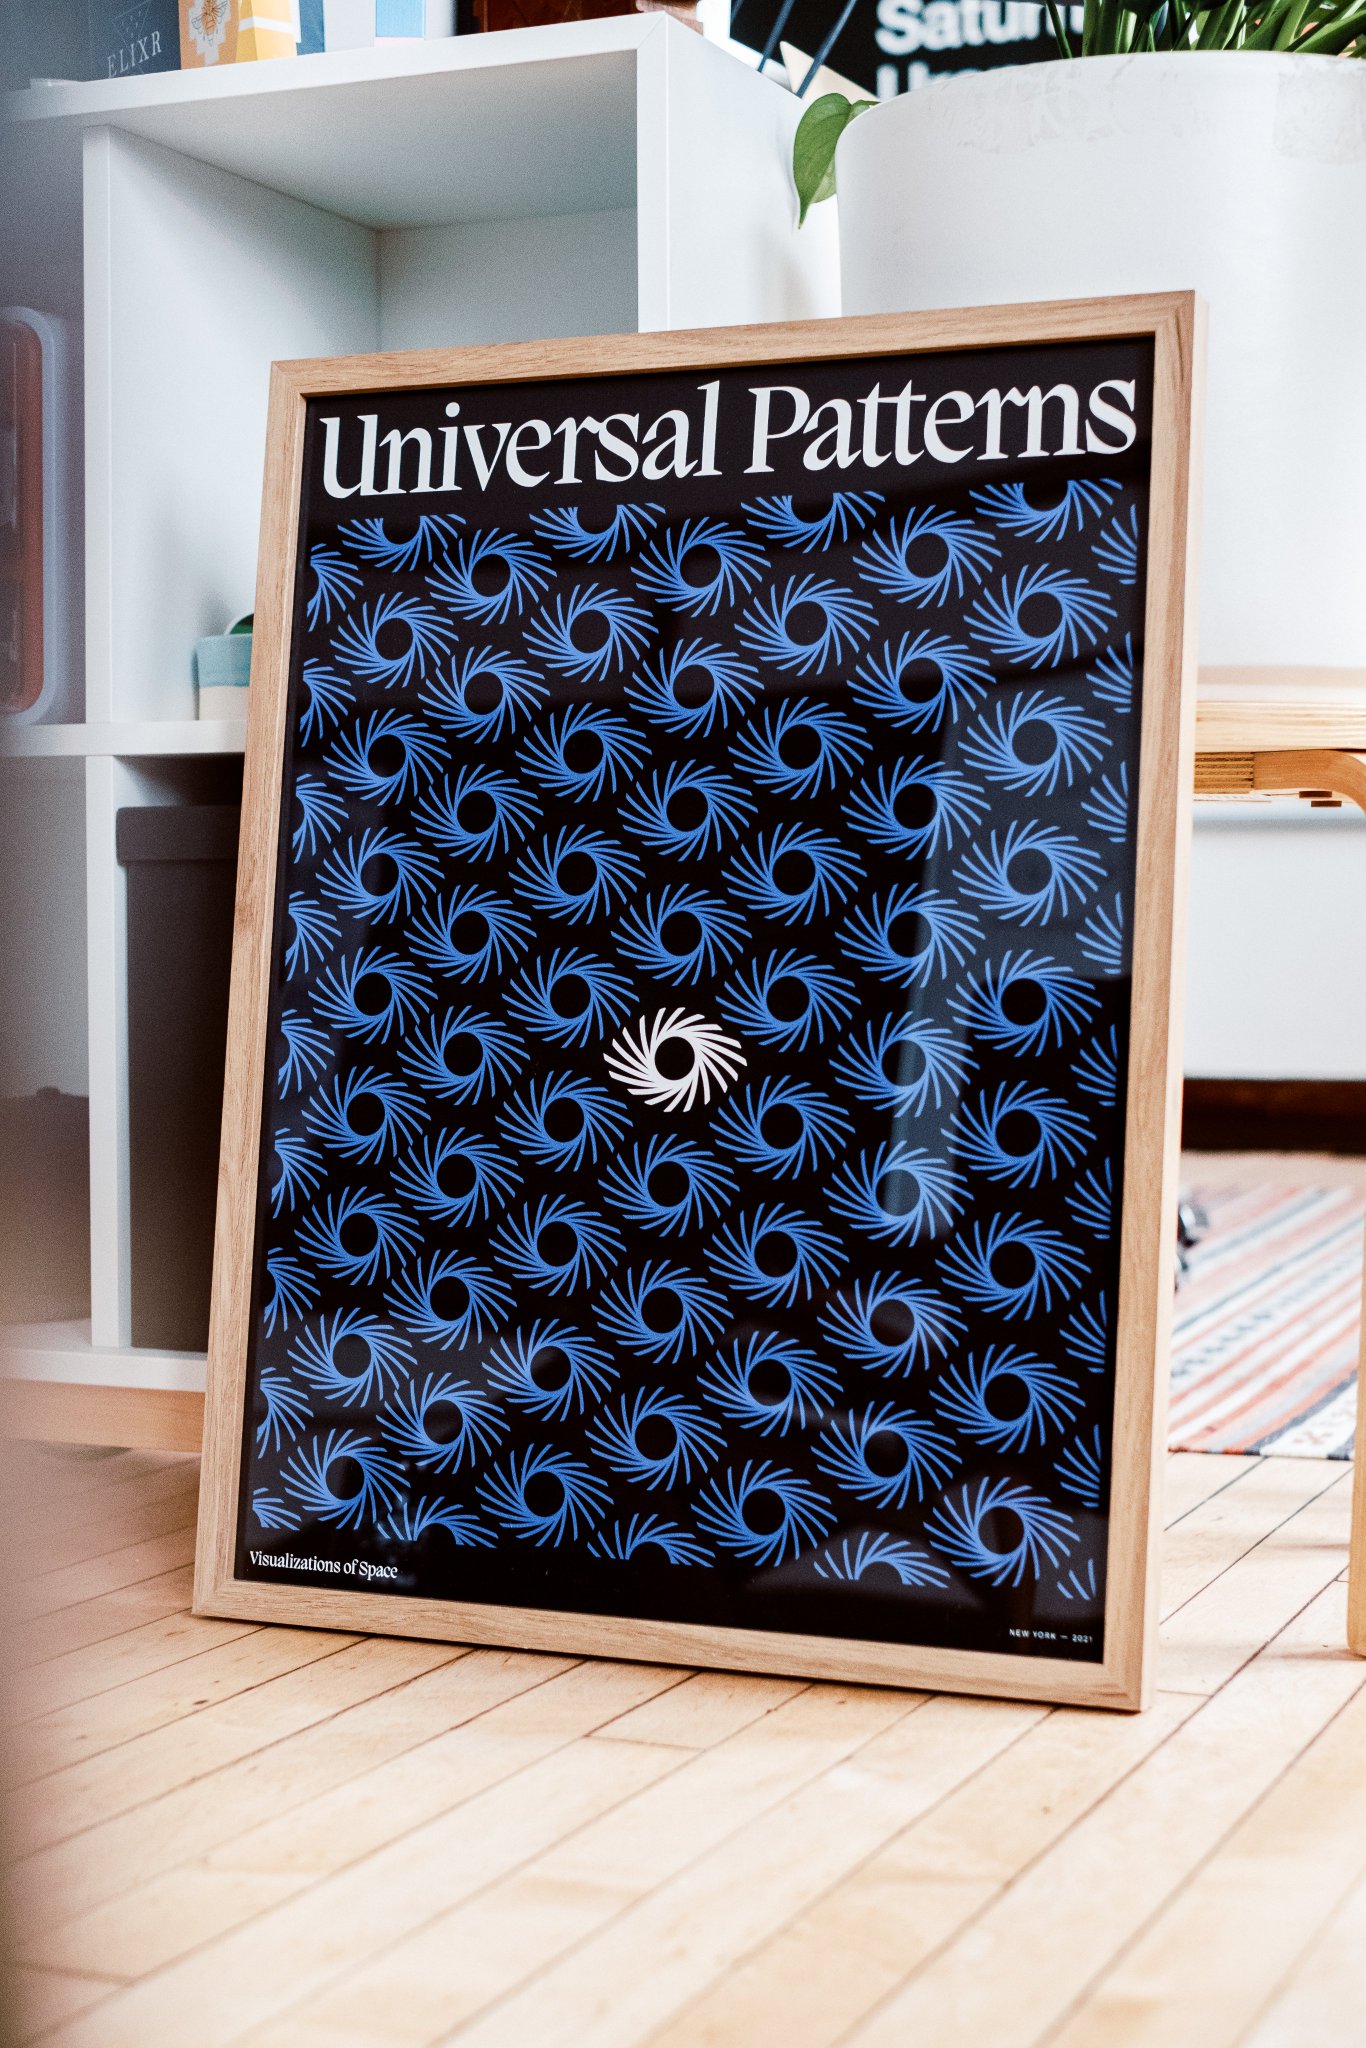 Universal Patterns by Smith Diction